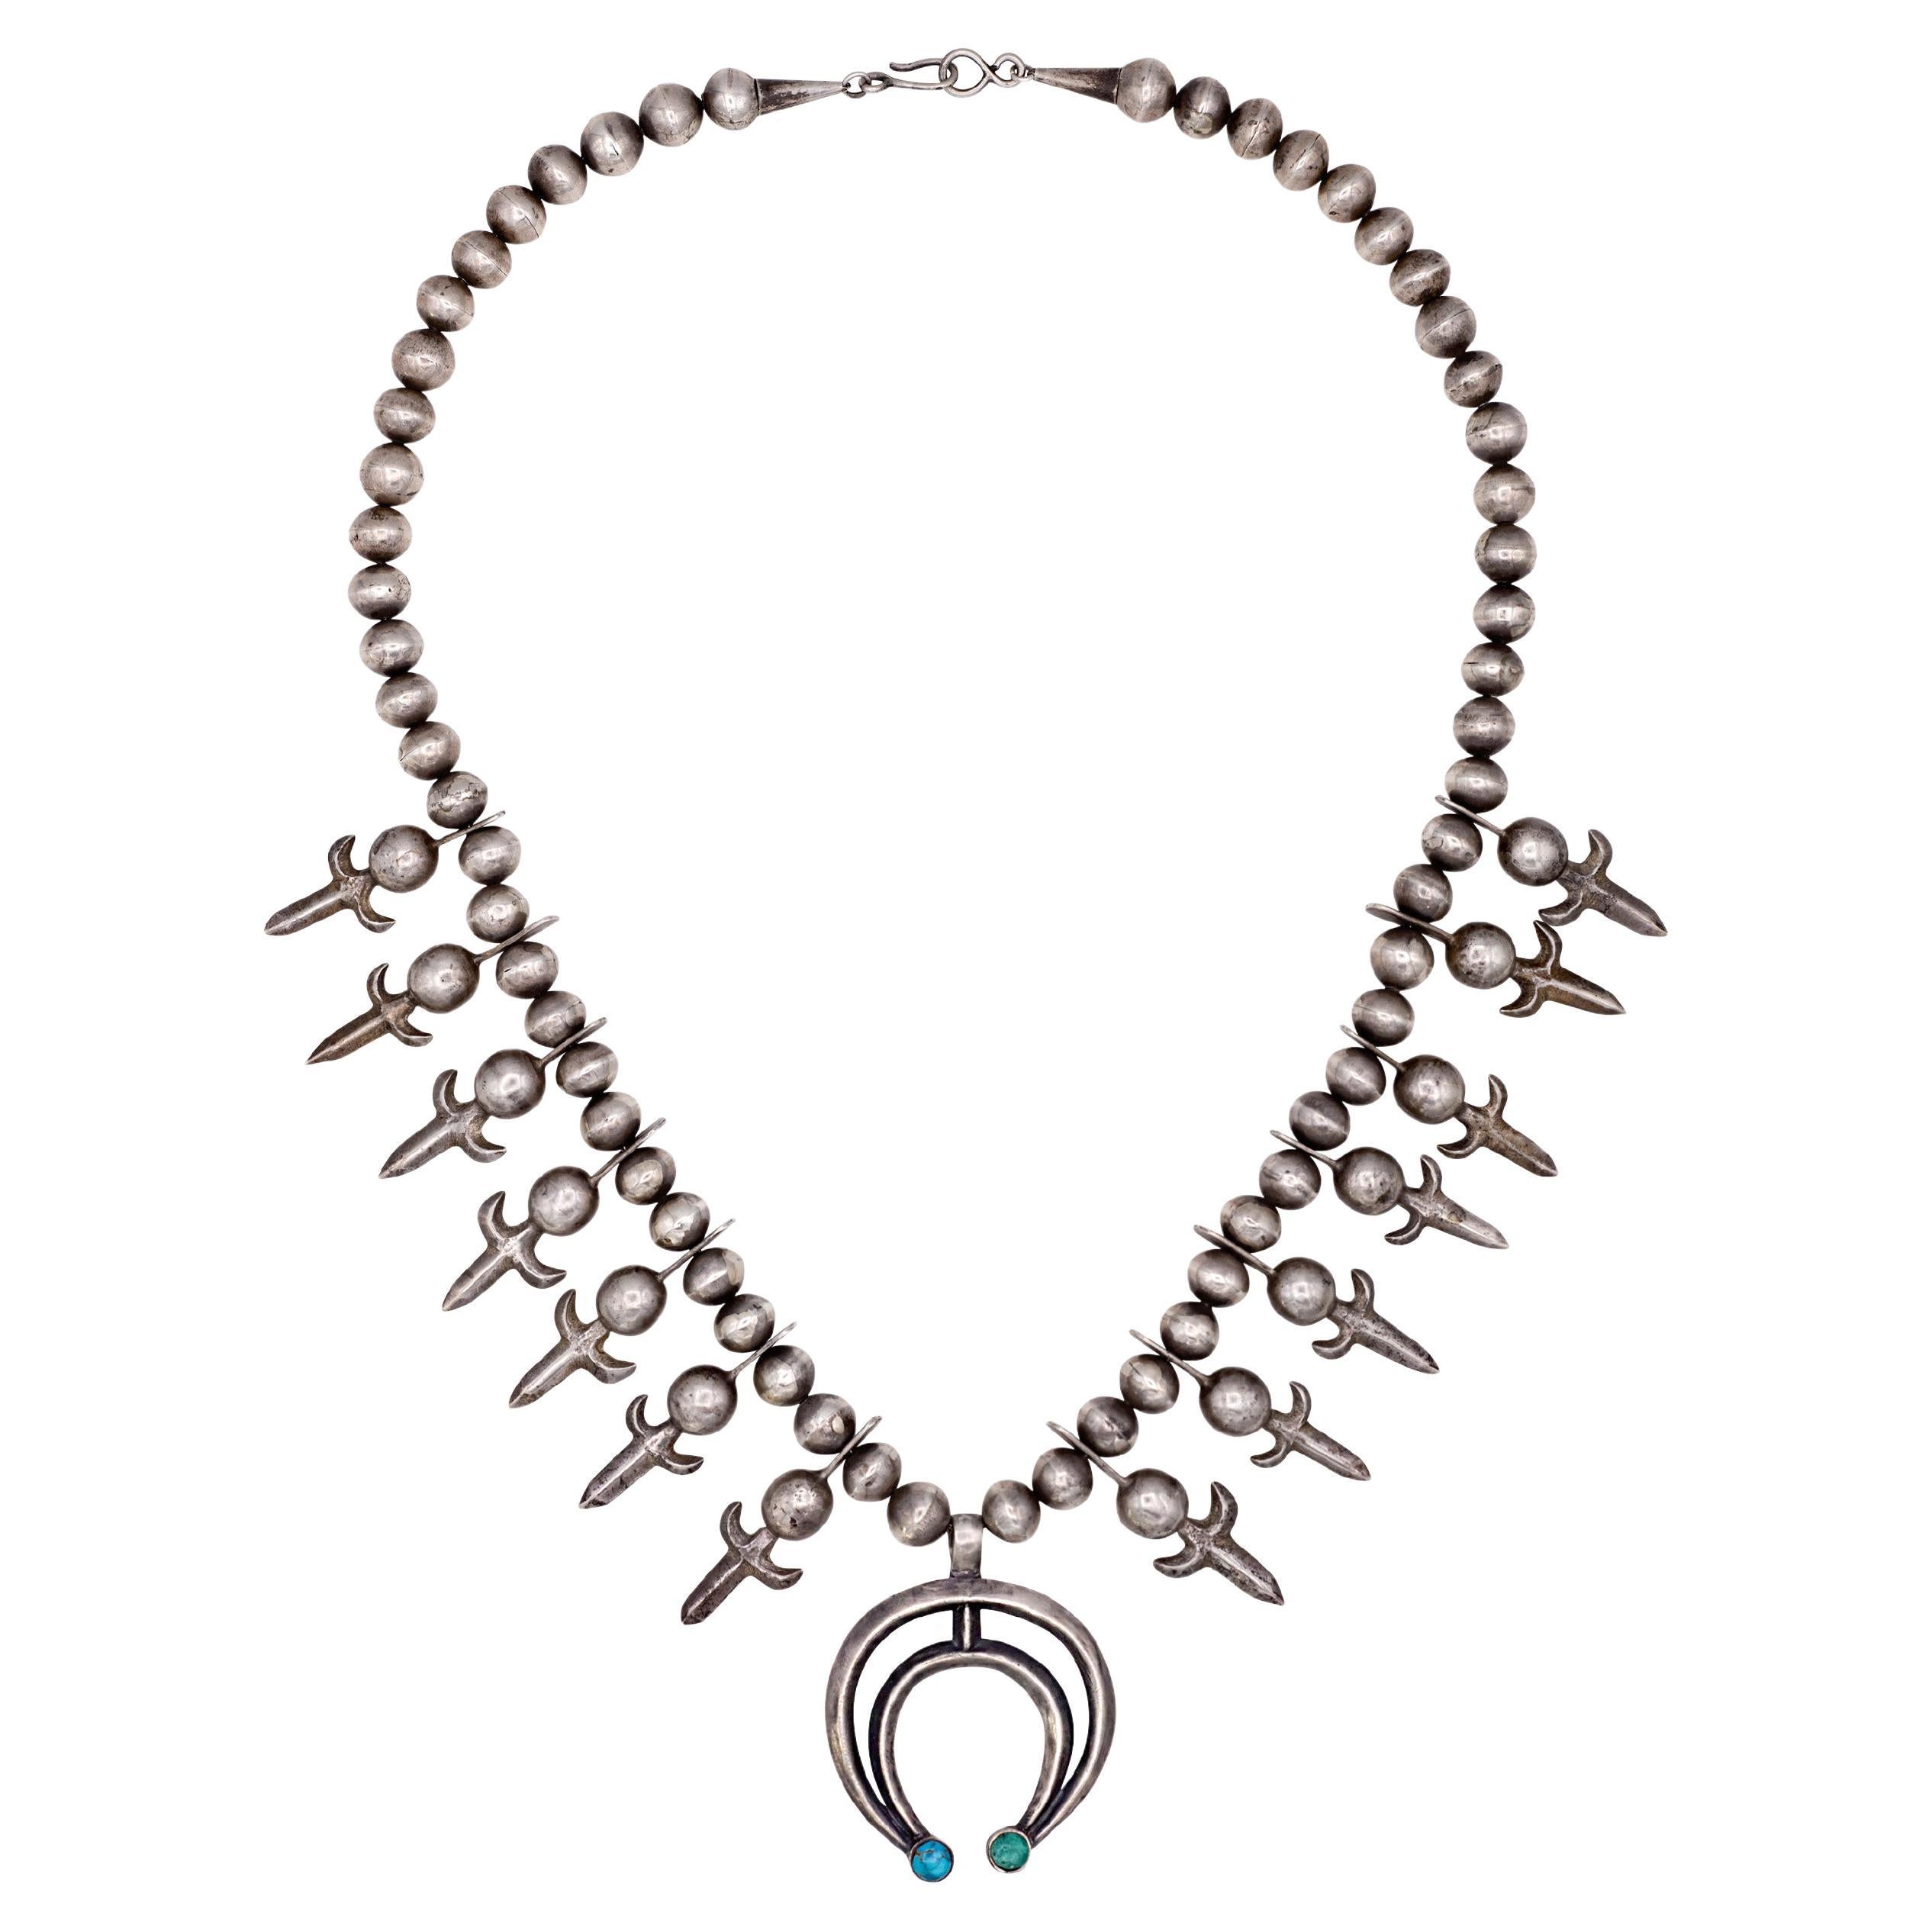 Navajo Turquoise and Sterling Silver Squash Blossom Necklace circa 1940